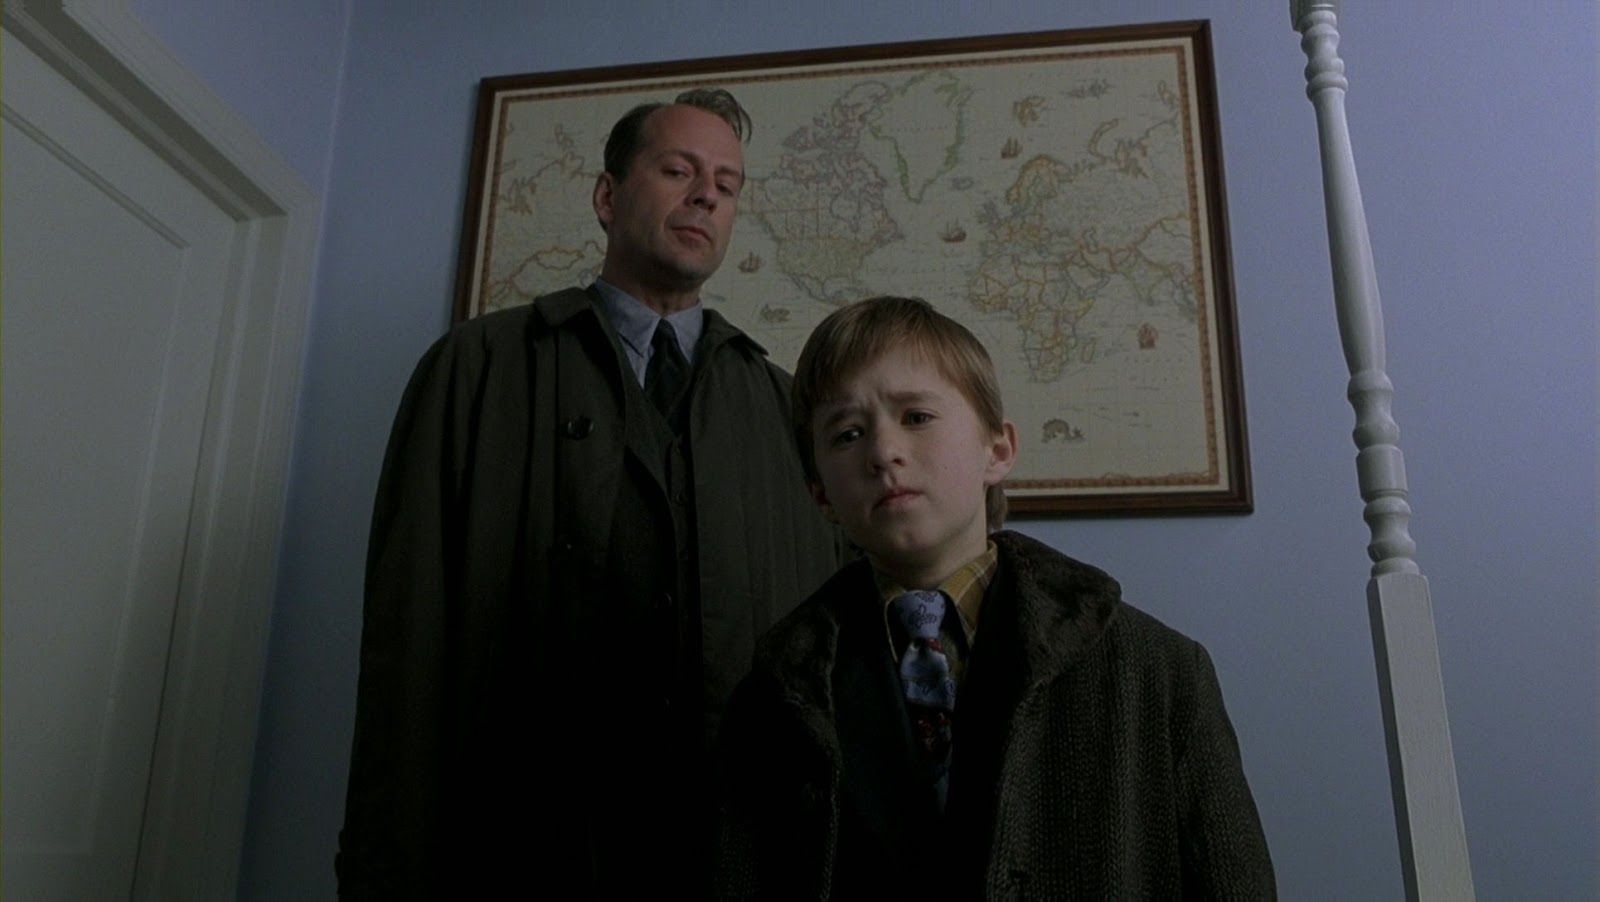 Hailey Joel Osment and Bruce Willis in The Sixth Sense stand side by side in a bedroom, looking troubled.